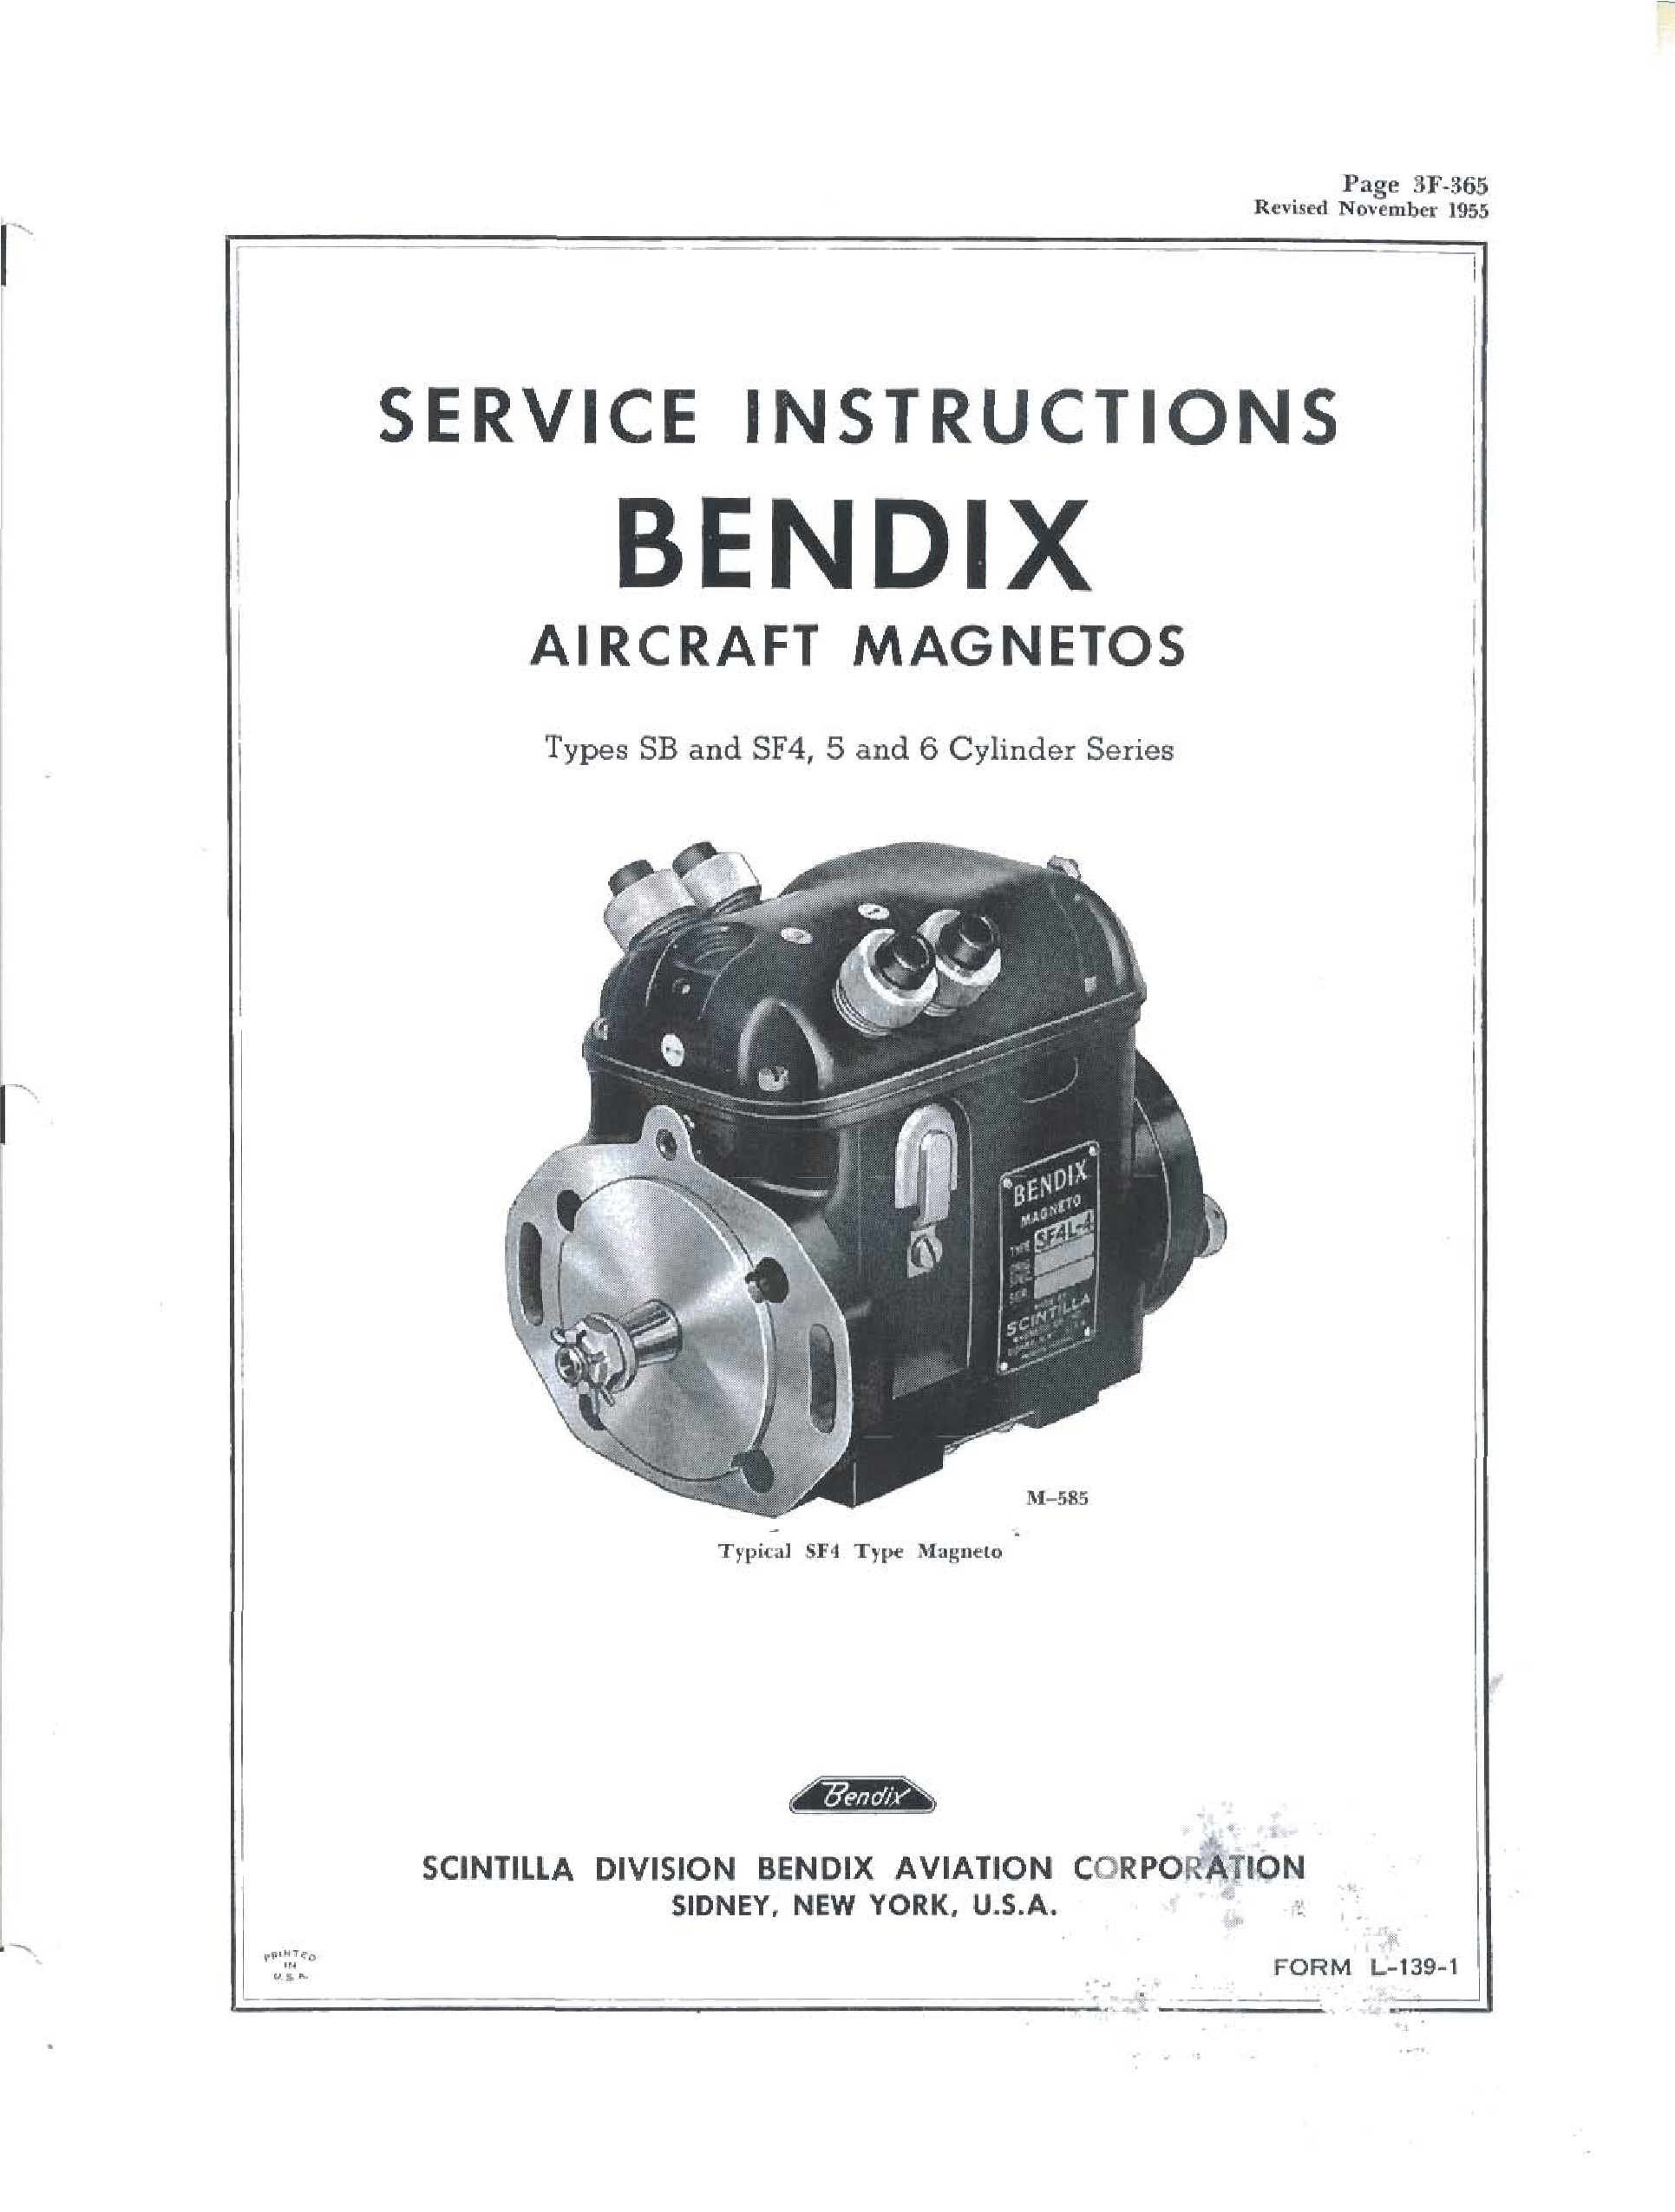 Sample page 1 from AirCorps Library document: Service Instructions for Bendix Aircraft Magnetos